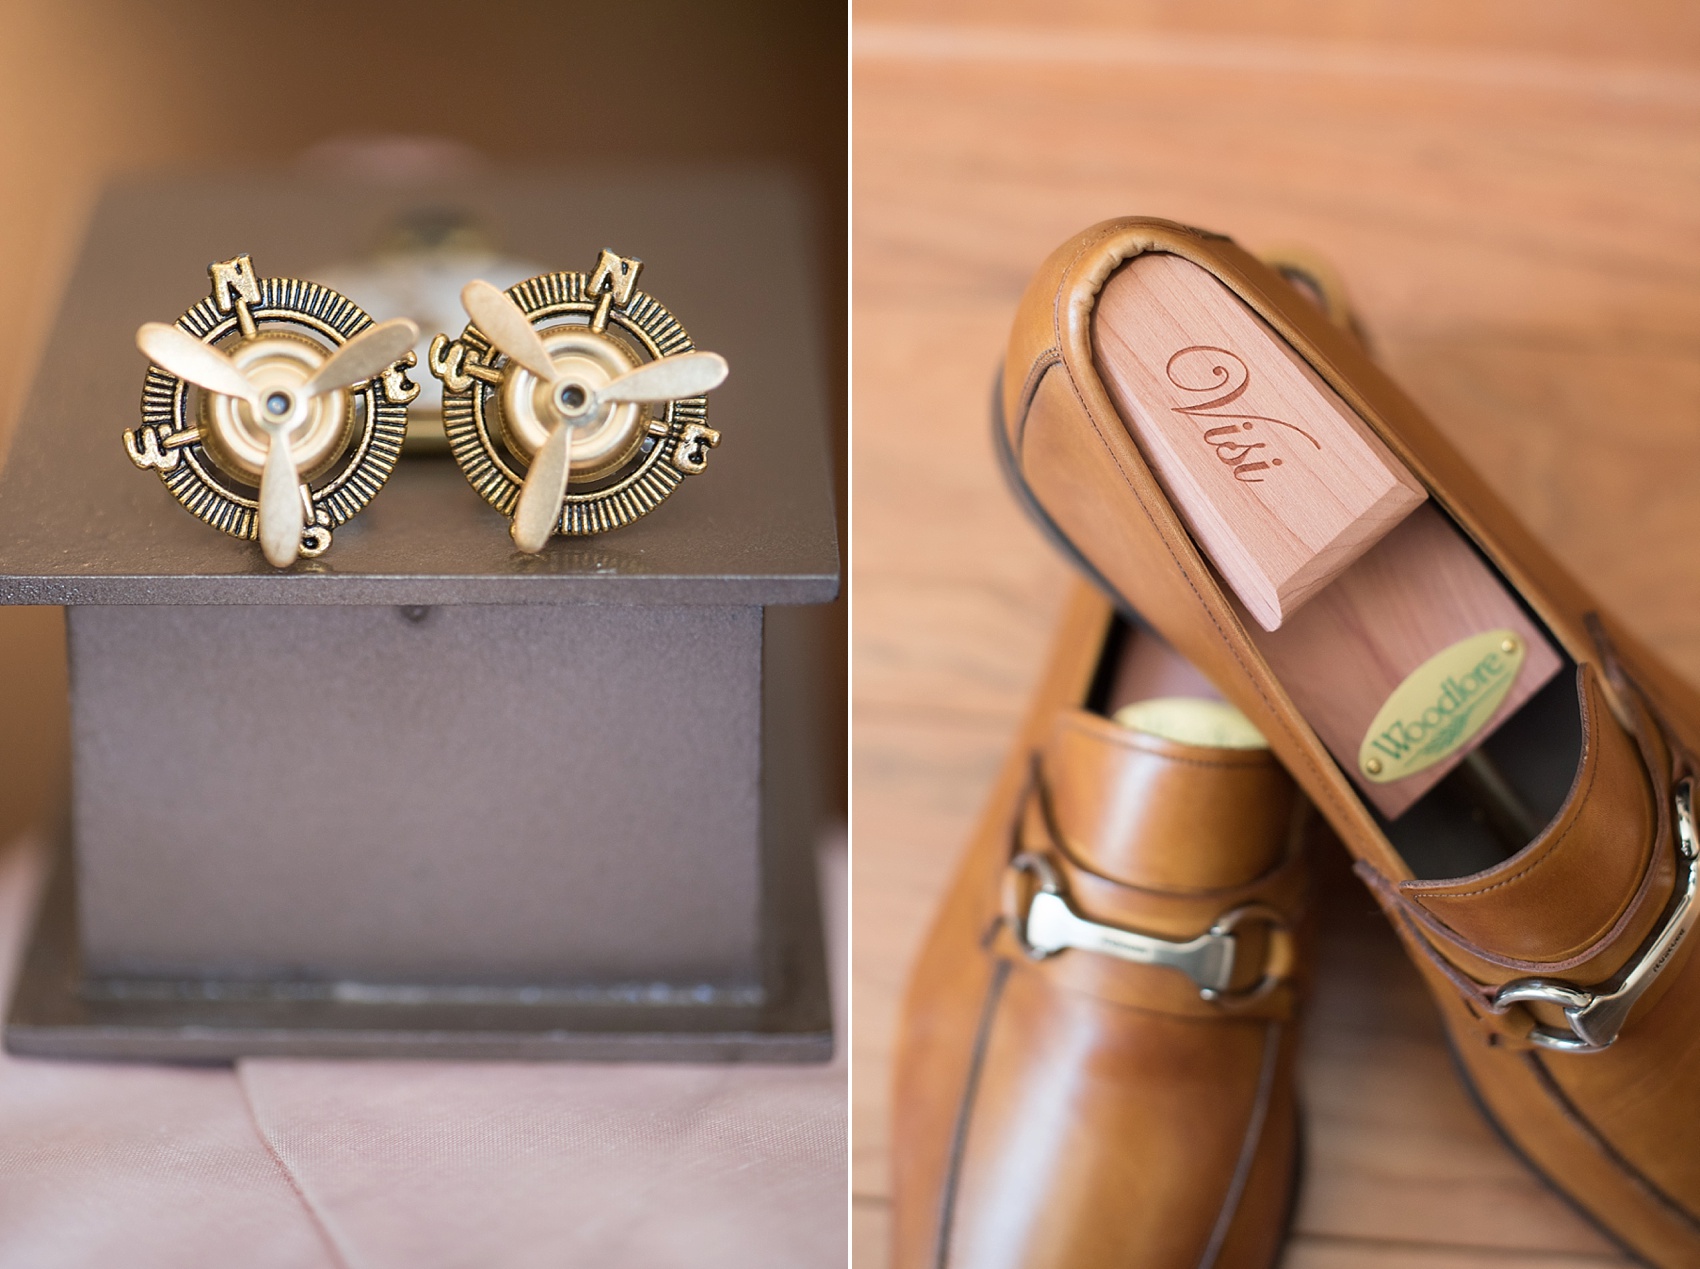 Connecticut beach wedding photos by Mikkel Paige Photography. Groom's navigator travel cufflinks and custom wood shoe tree inserts.